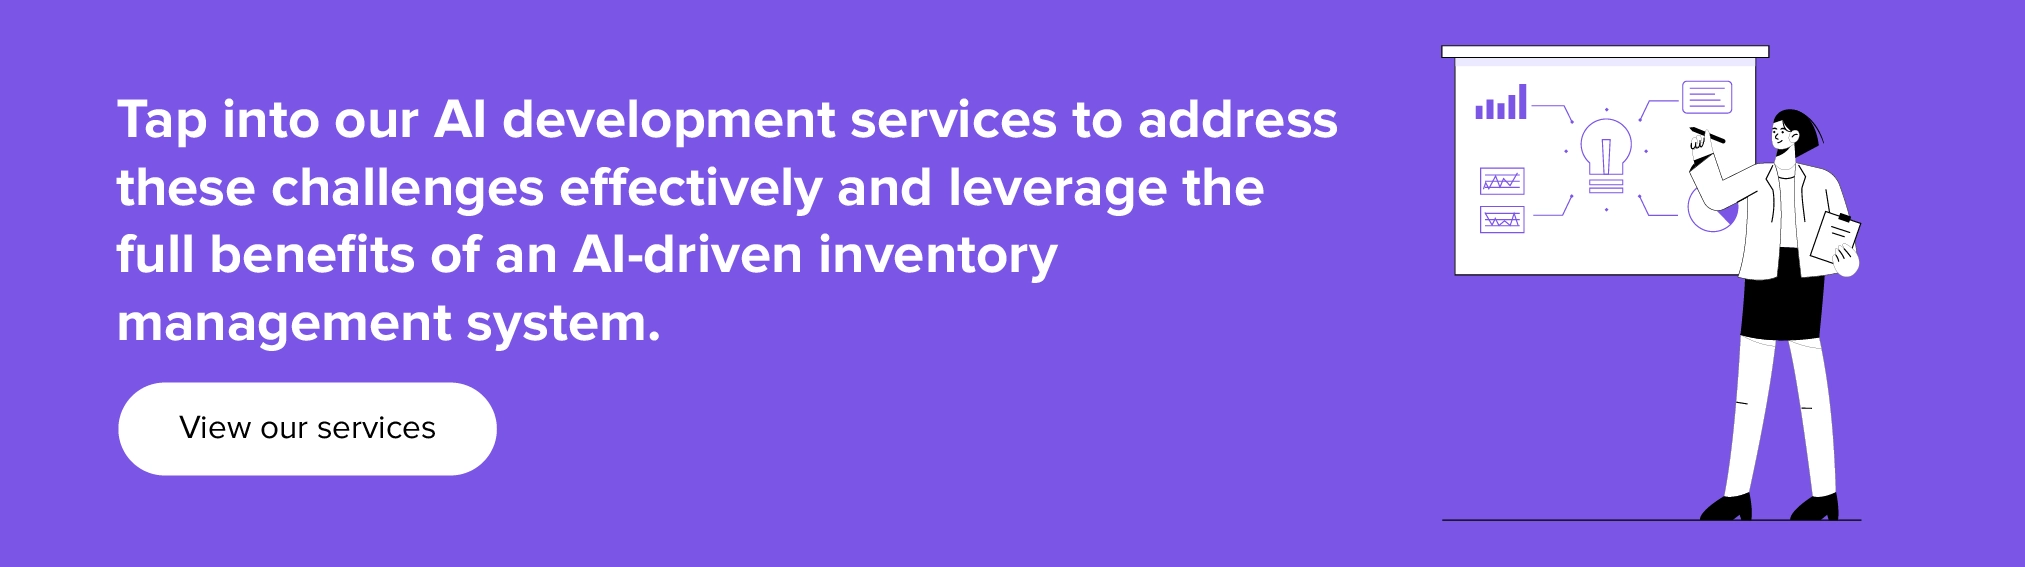 AI-driven inventory management system